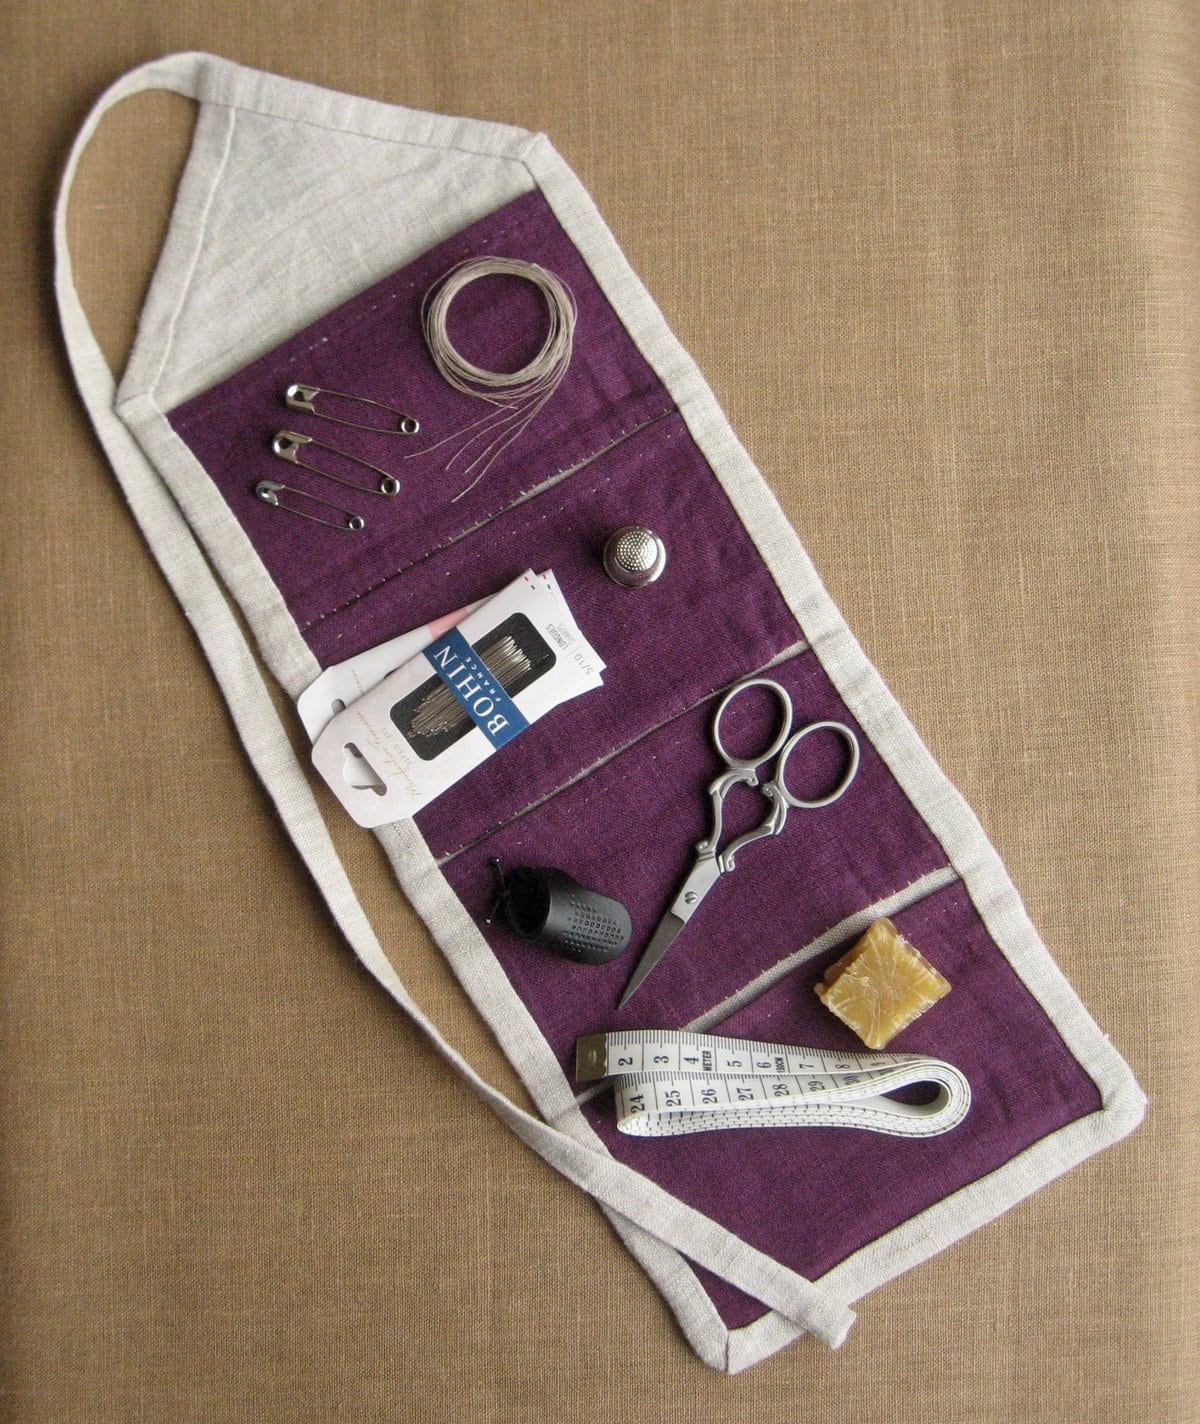 image description: a handsewn fabric pouch with multiple pockets; various sewing tools sit on top